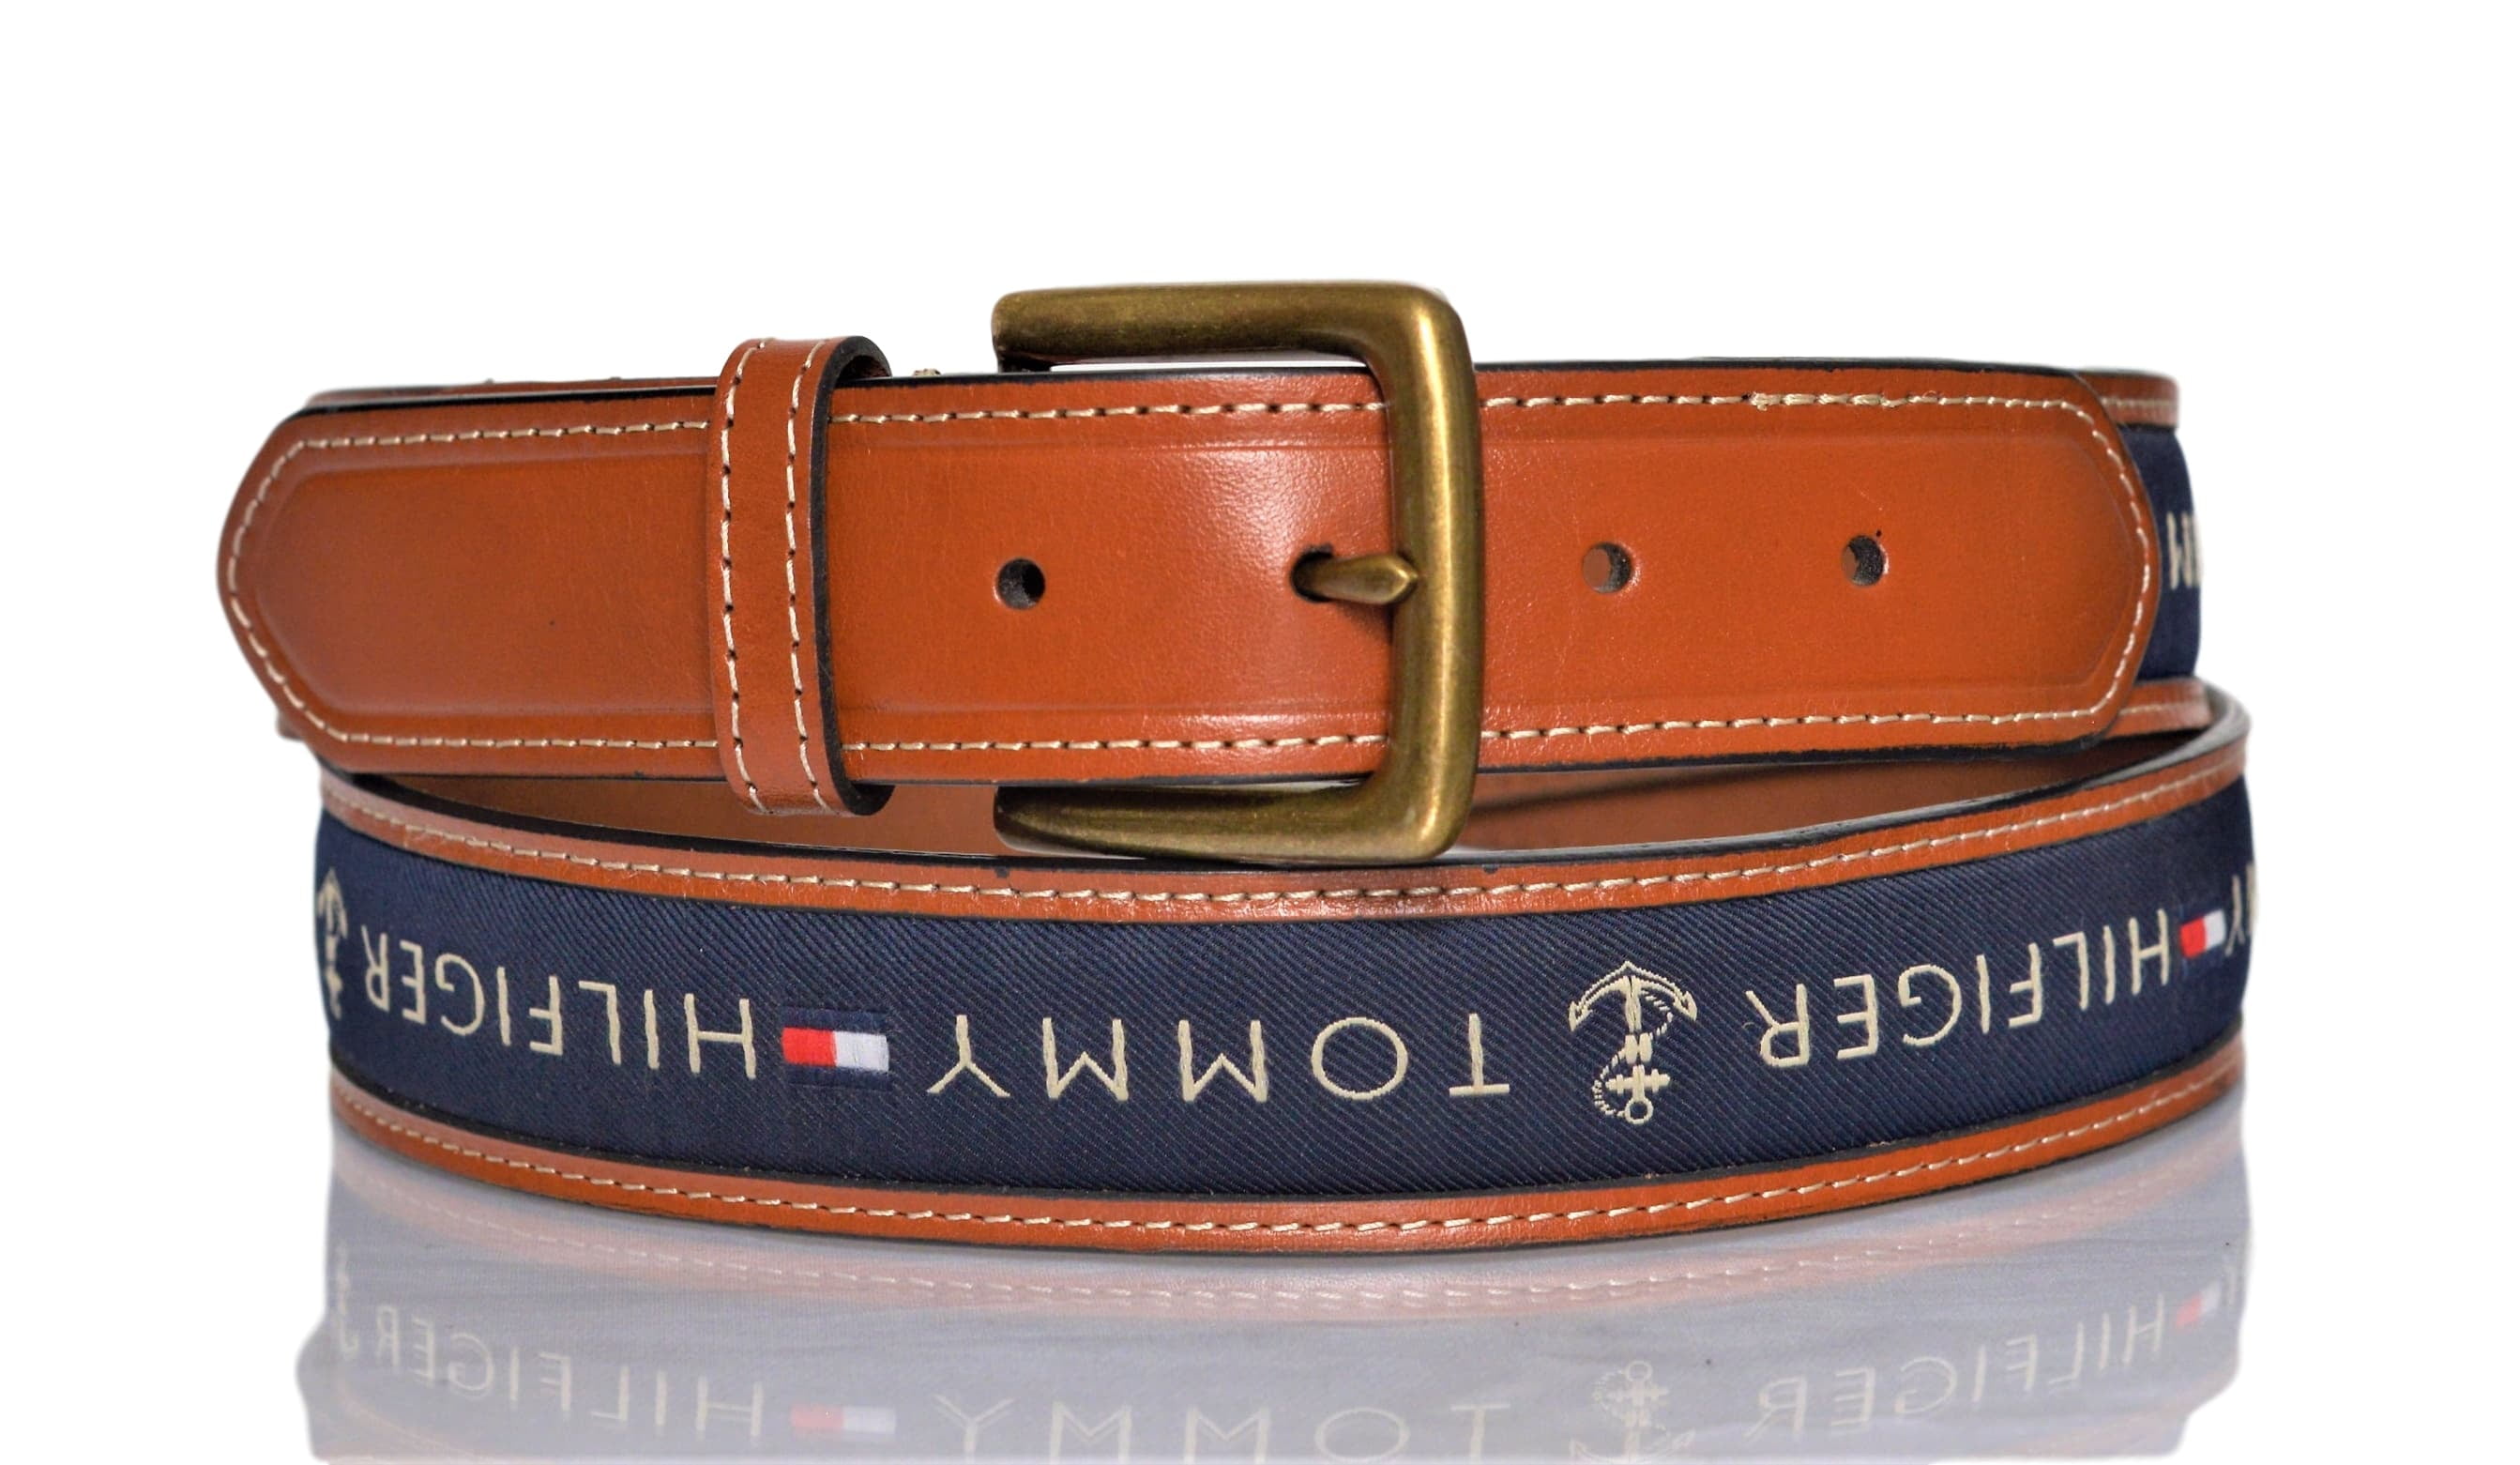 Tommy Hilfiger Men's Leather Woven Belt Size 30-32 Fits Waist up 35 NWT  $49.00